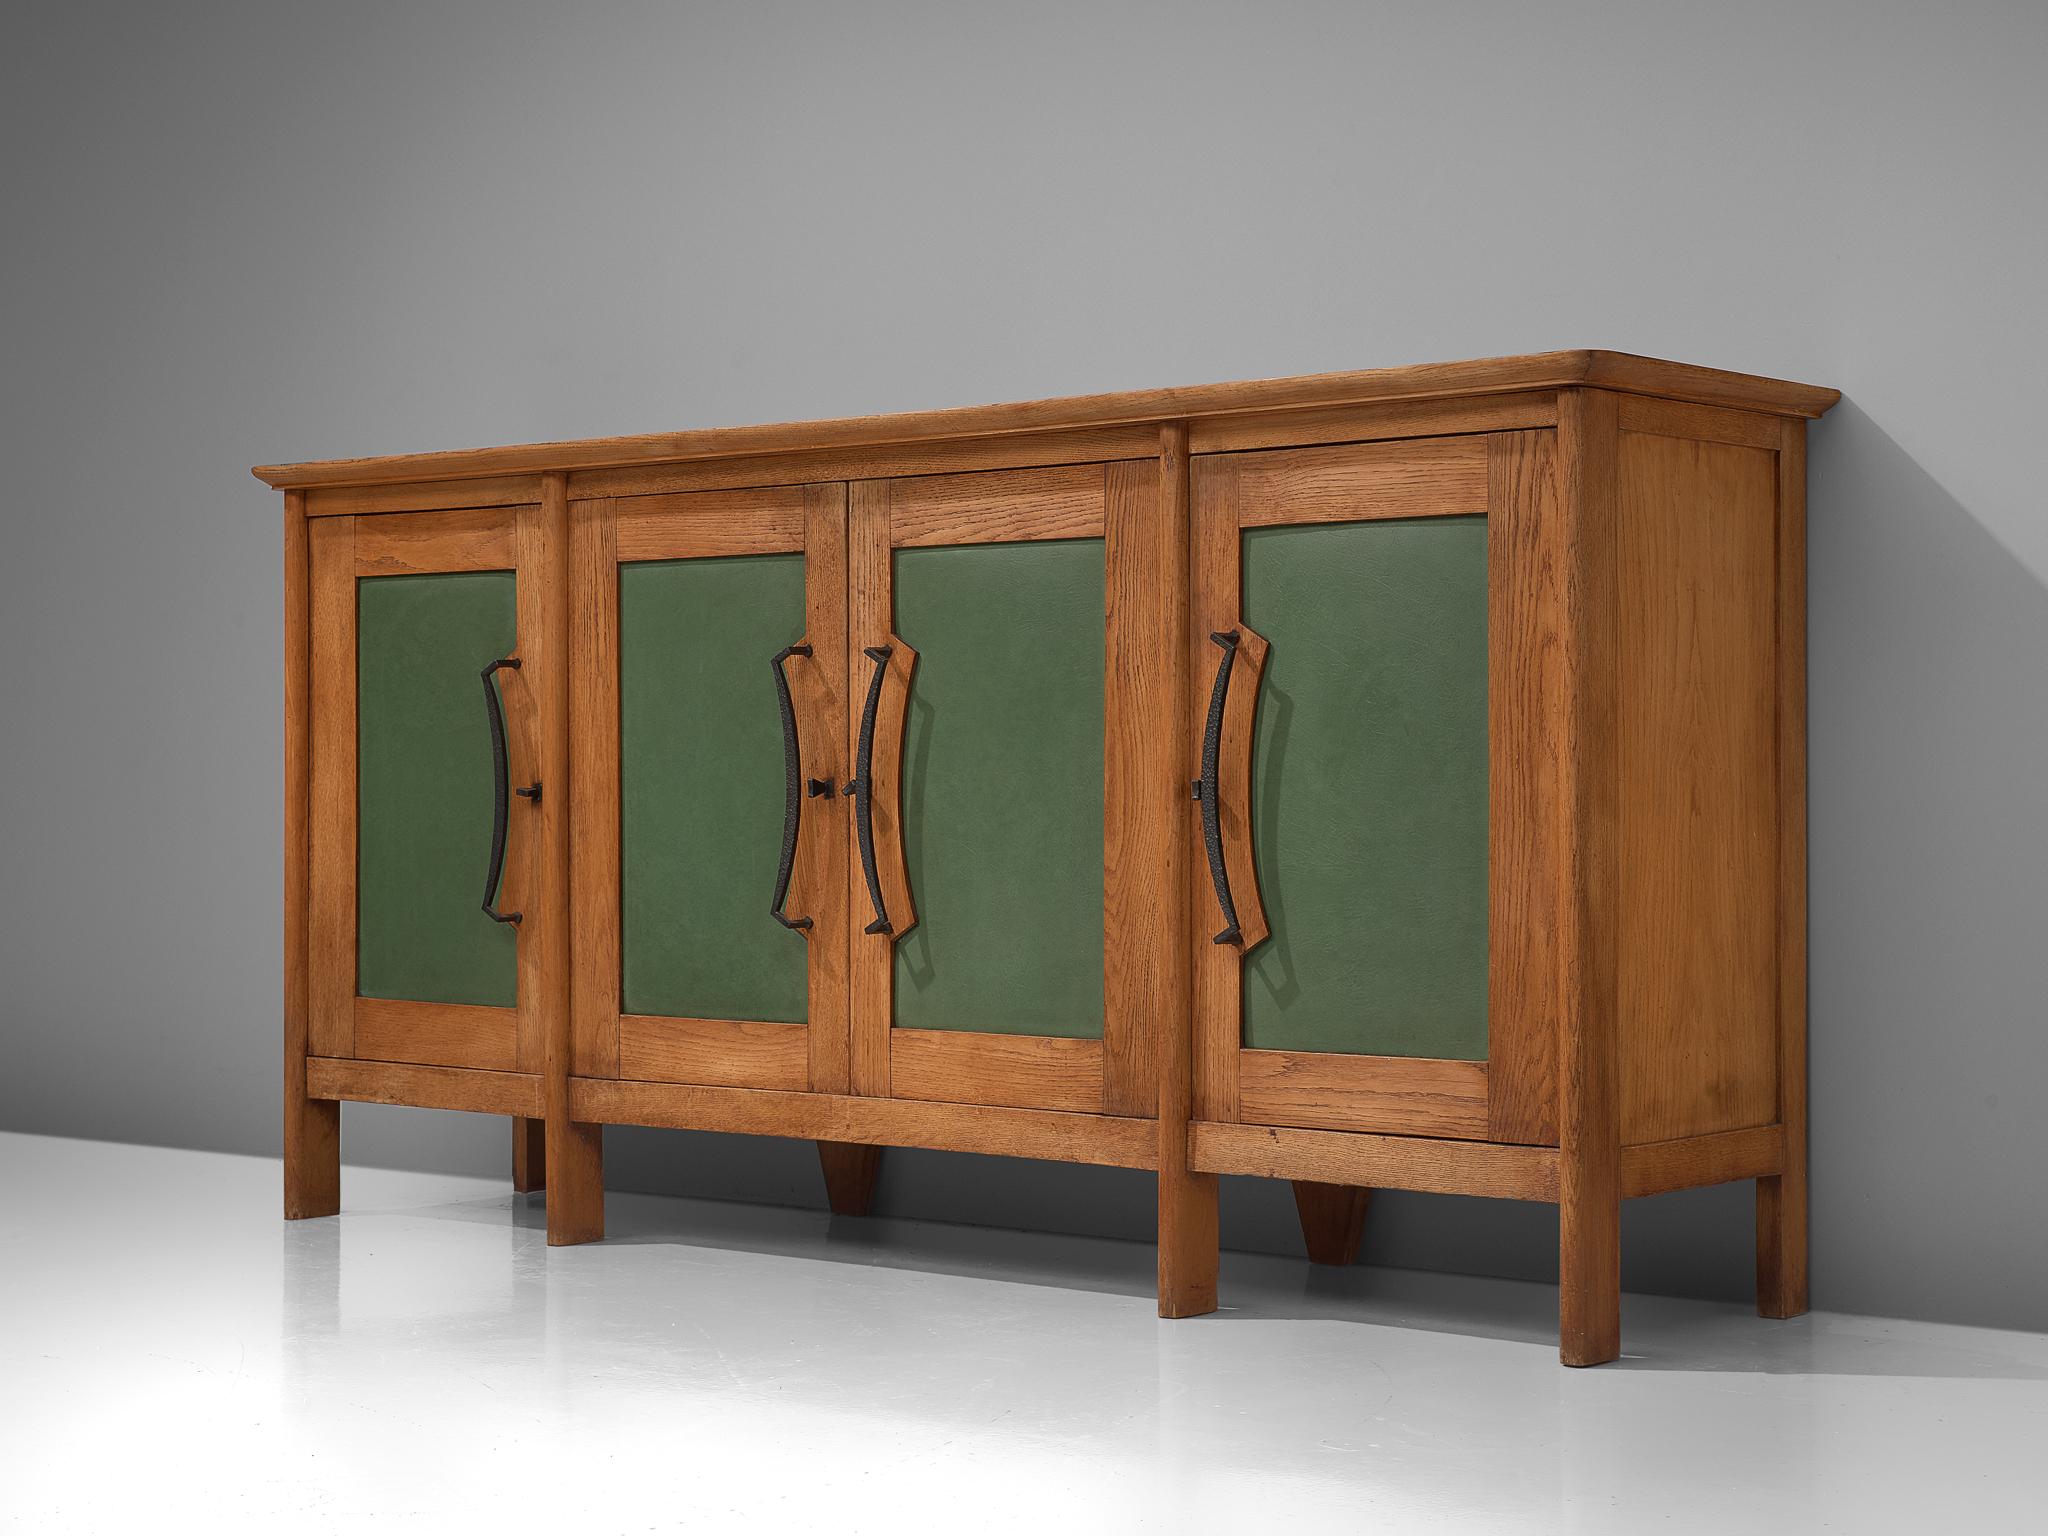 Large sideboard in oak and iron, France, 1940s.

This large oak sideboard with green leatherette inlayed doors. The high sideboard has modest and rustic look. The four doors are finished with a leatherette panel en large, curved handles made in